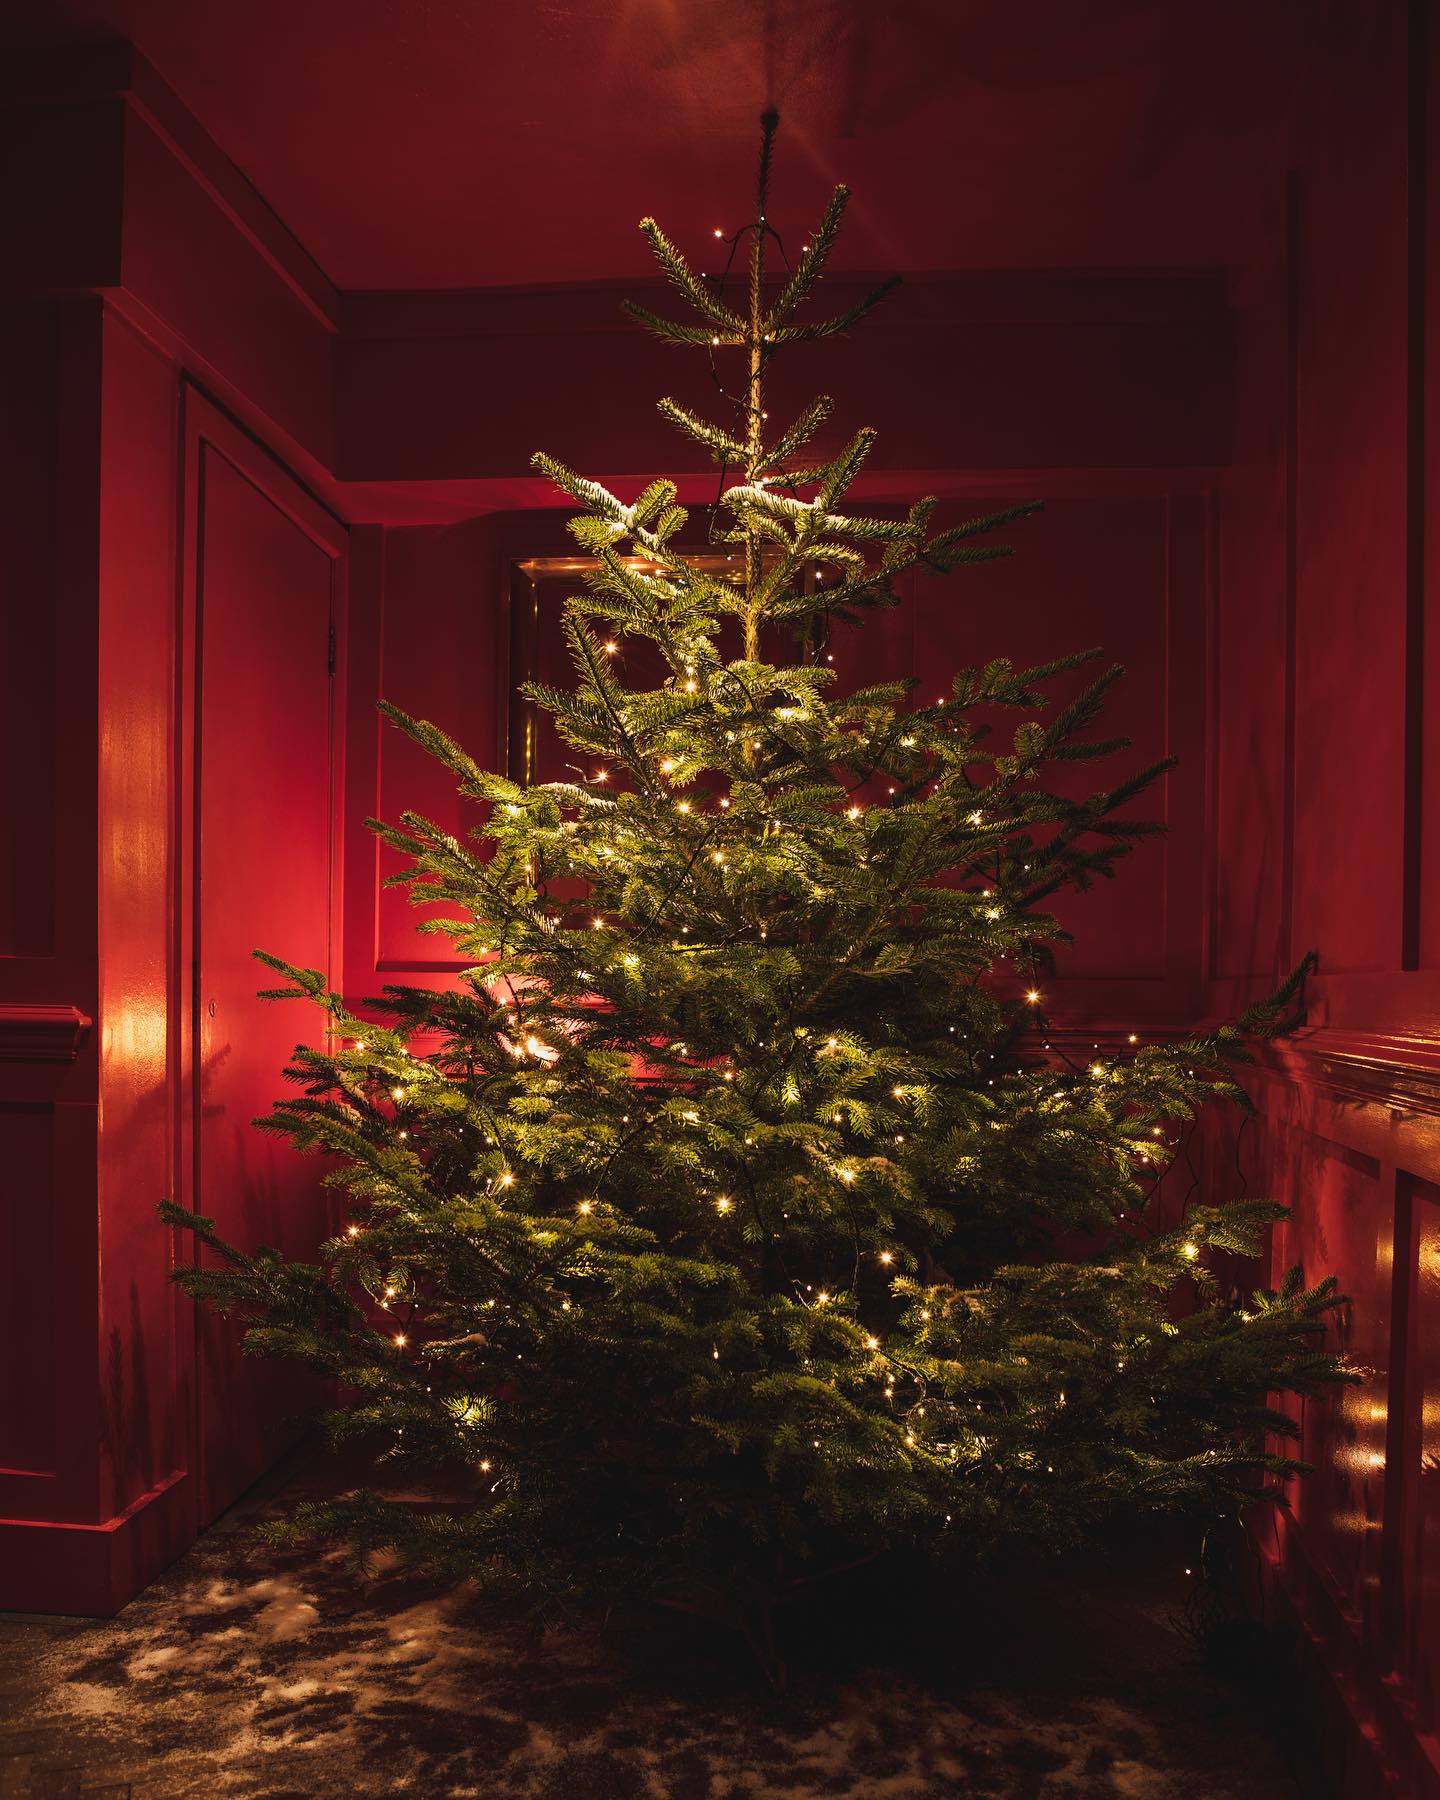 Christmas Parties for 2023 are now live ???? …

Our Christmas party packages allow you to celebrate the festive season with a touch of decadence in an exclusive and intimate environment.

More information available on our website via the link in our bio! 

#christmas #christmasparty #party #xmas #christmaspartyideas #christmaspartydecor #christmastree #events #eventlocation #eventvenue #venue #venuehire #venuehiremanchester #corporatechristmasparty #corporateevents #manchestervenue #fivefourstudios #manchester